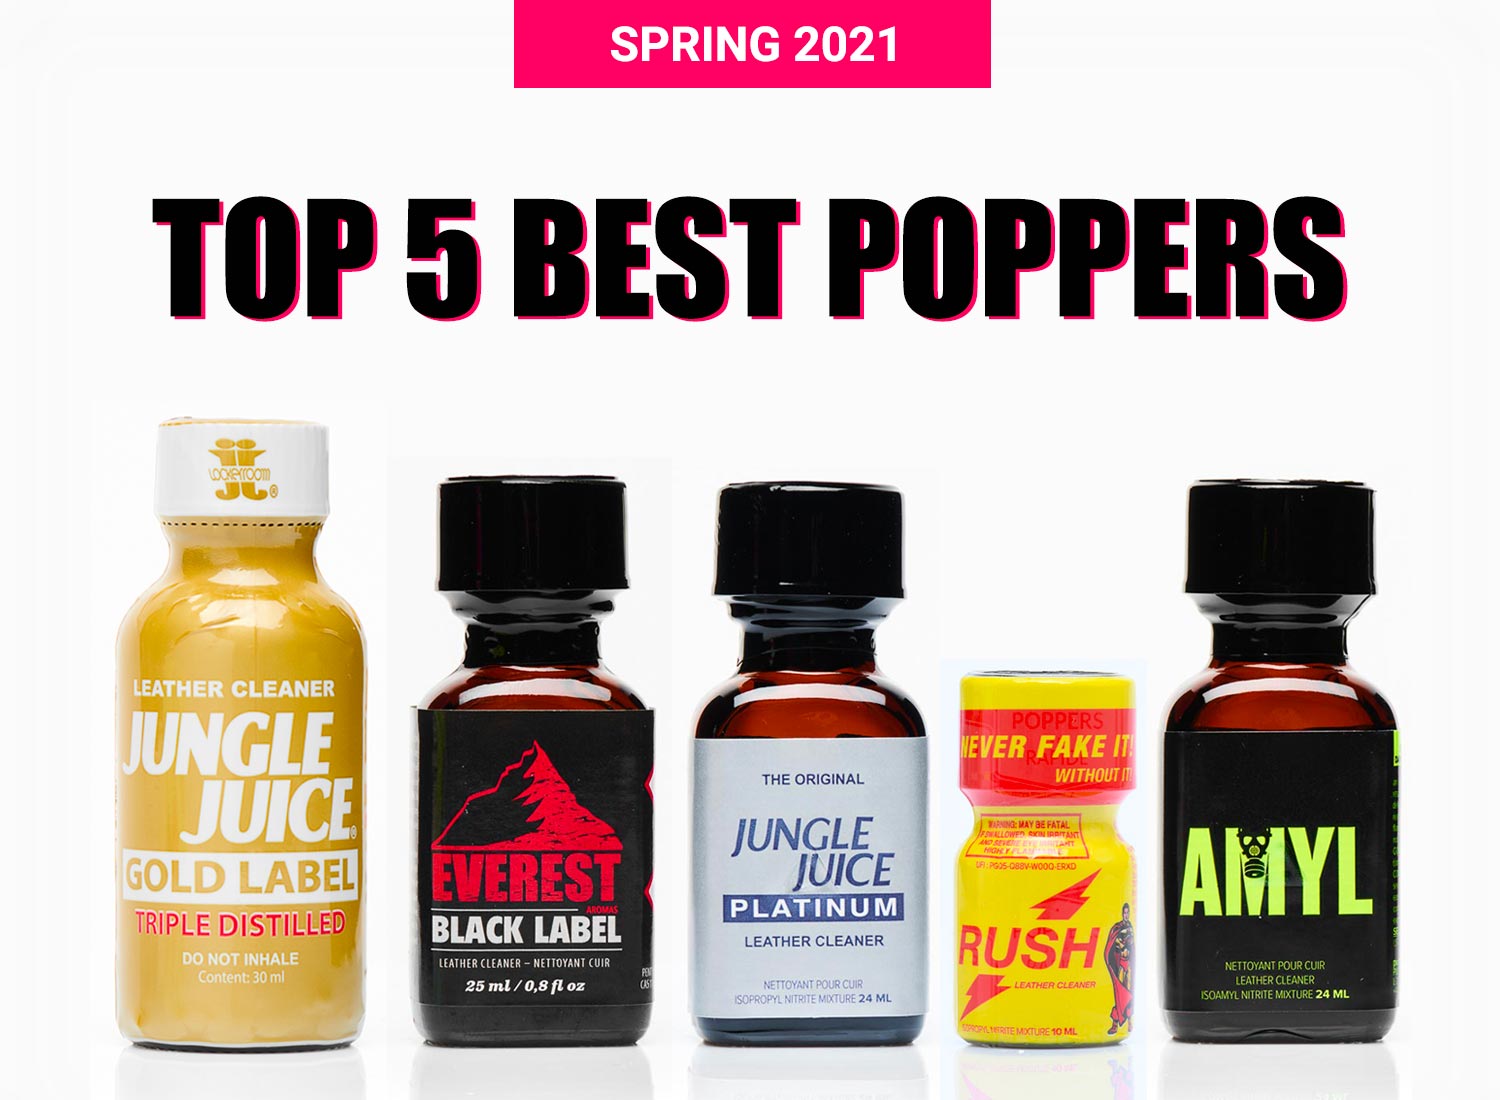 passage fast Bil Our top 5 best poppers for spring 2021! - Poppers Aromas Blog